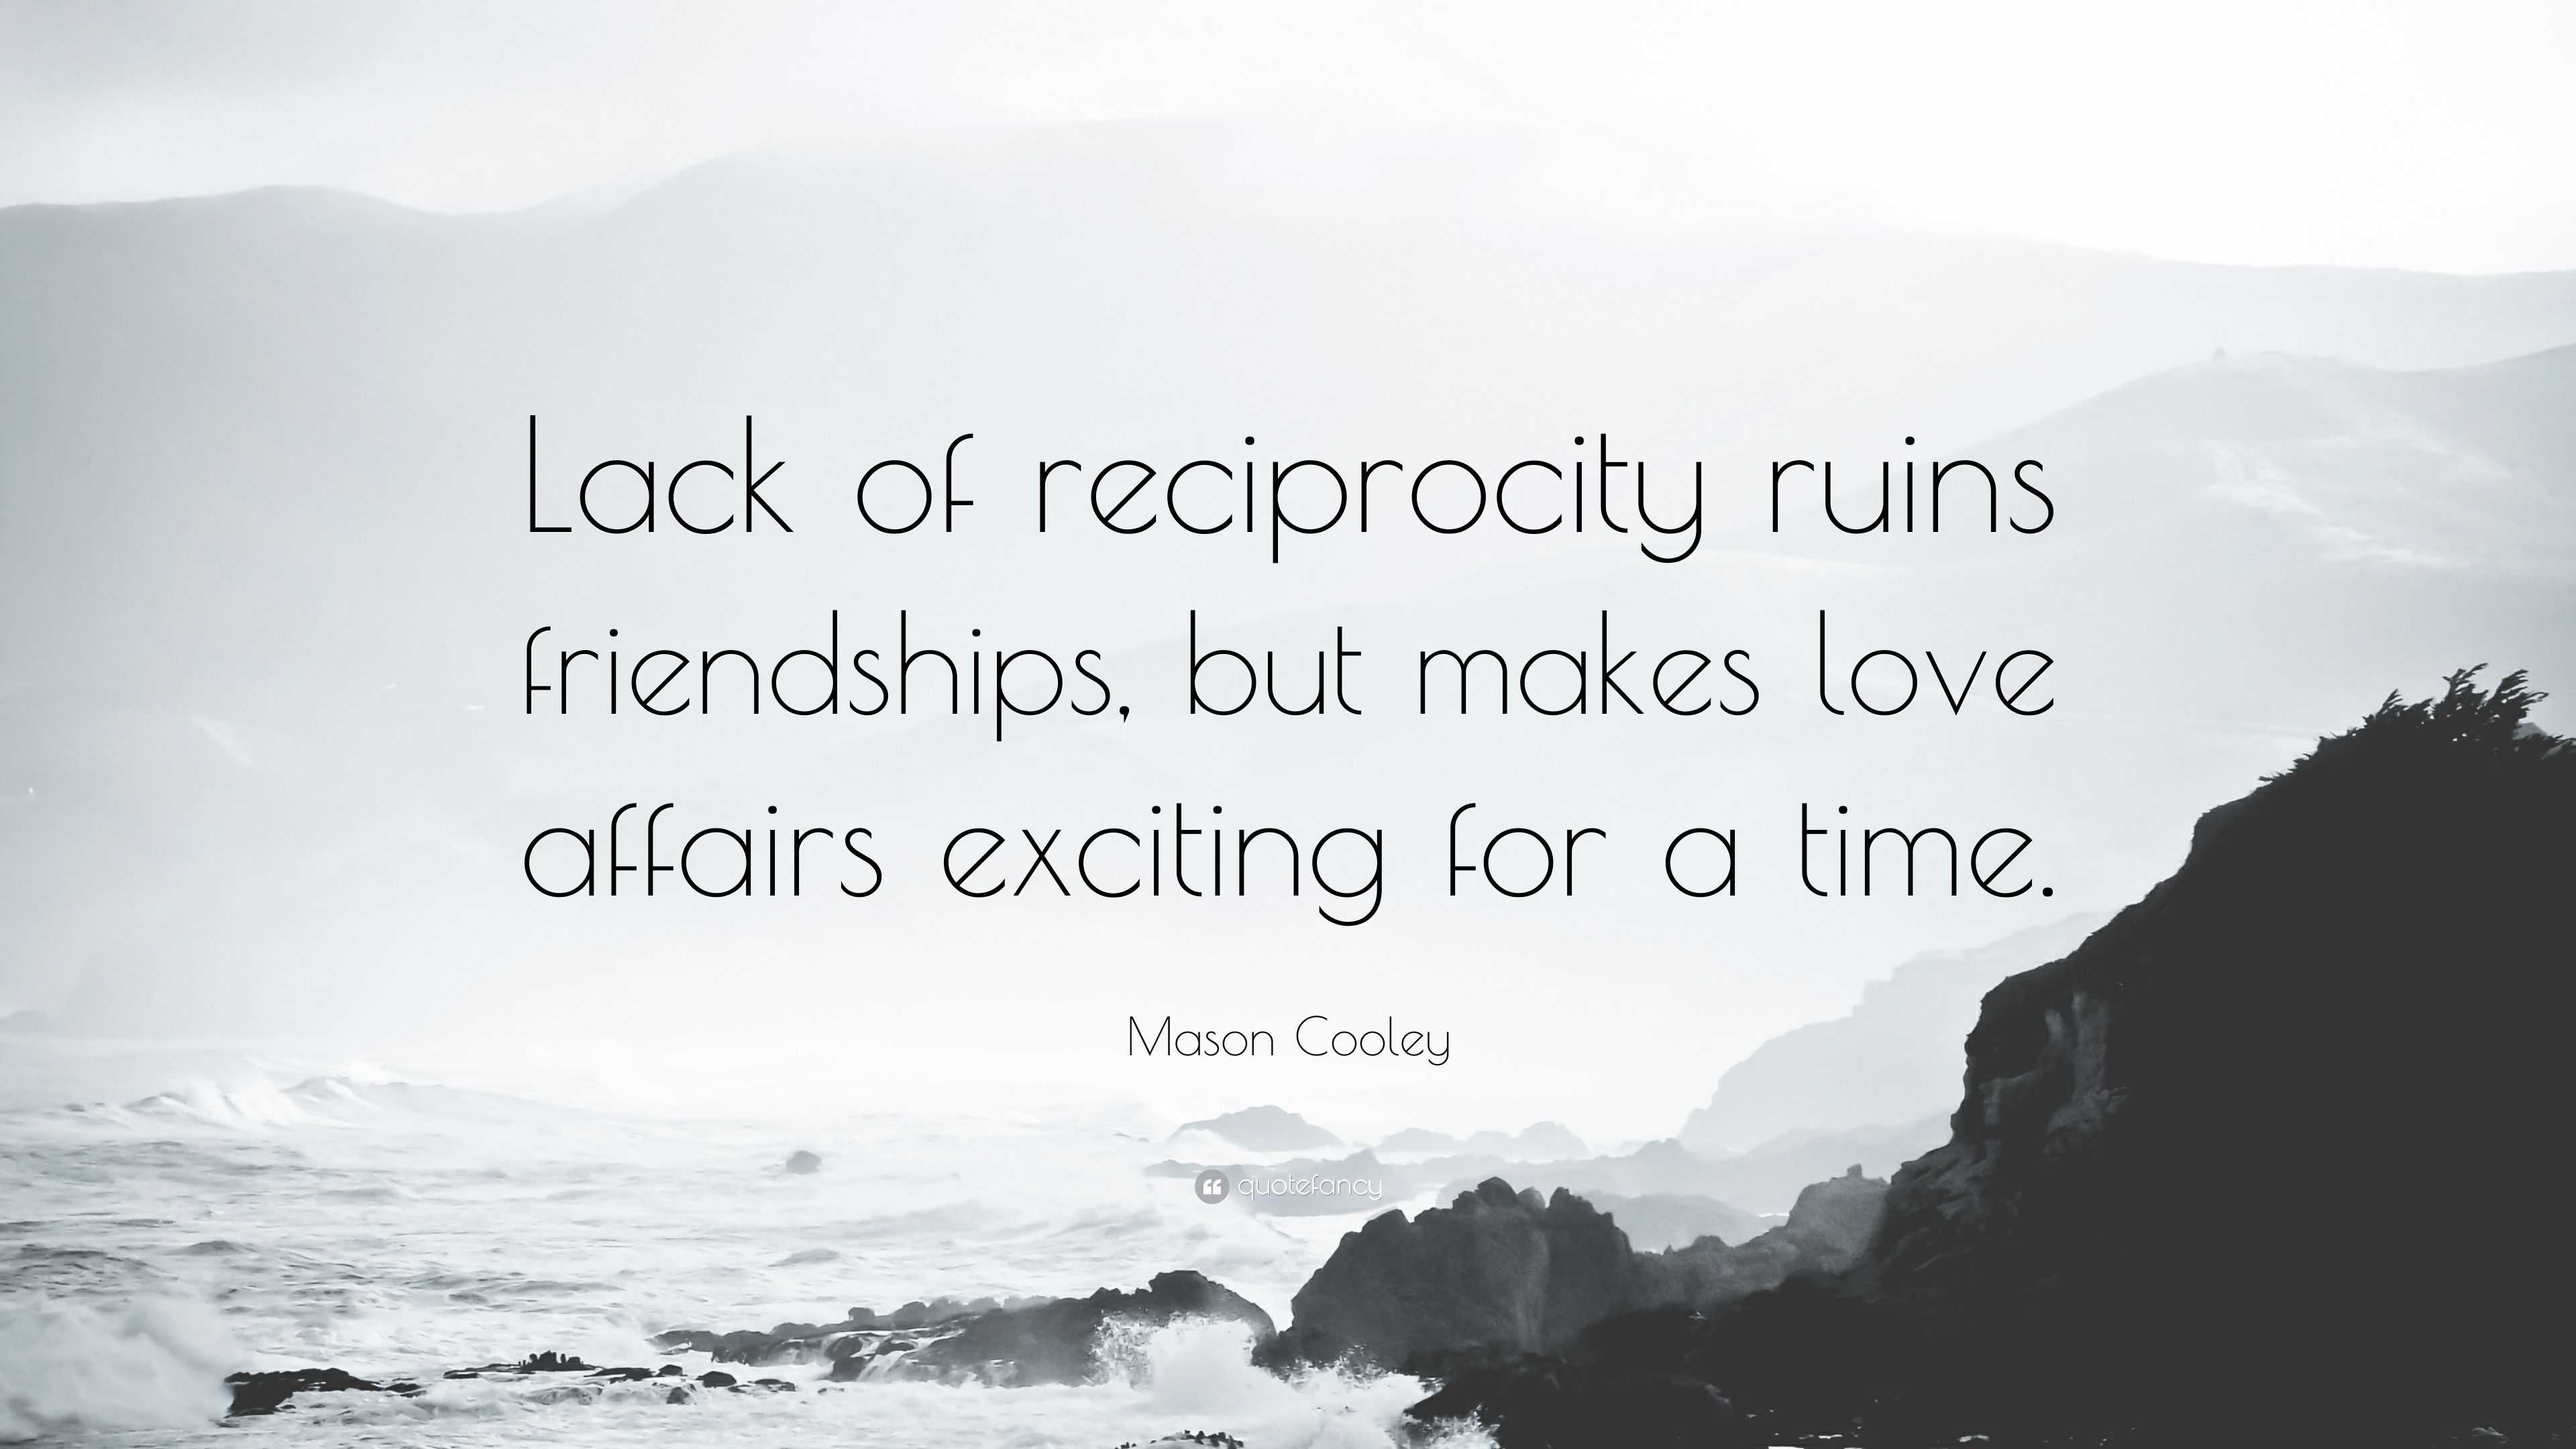 Mason Cooley Quote “Lack of reciprocity ruins friendships but makes love affairs exciting